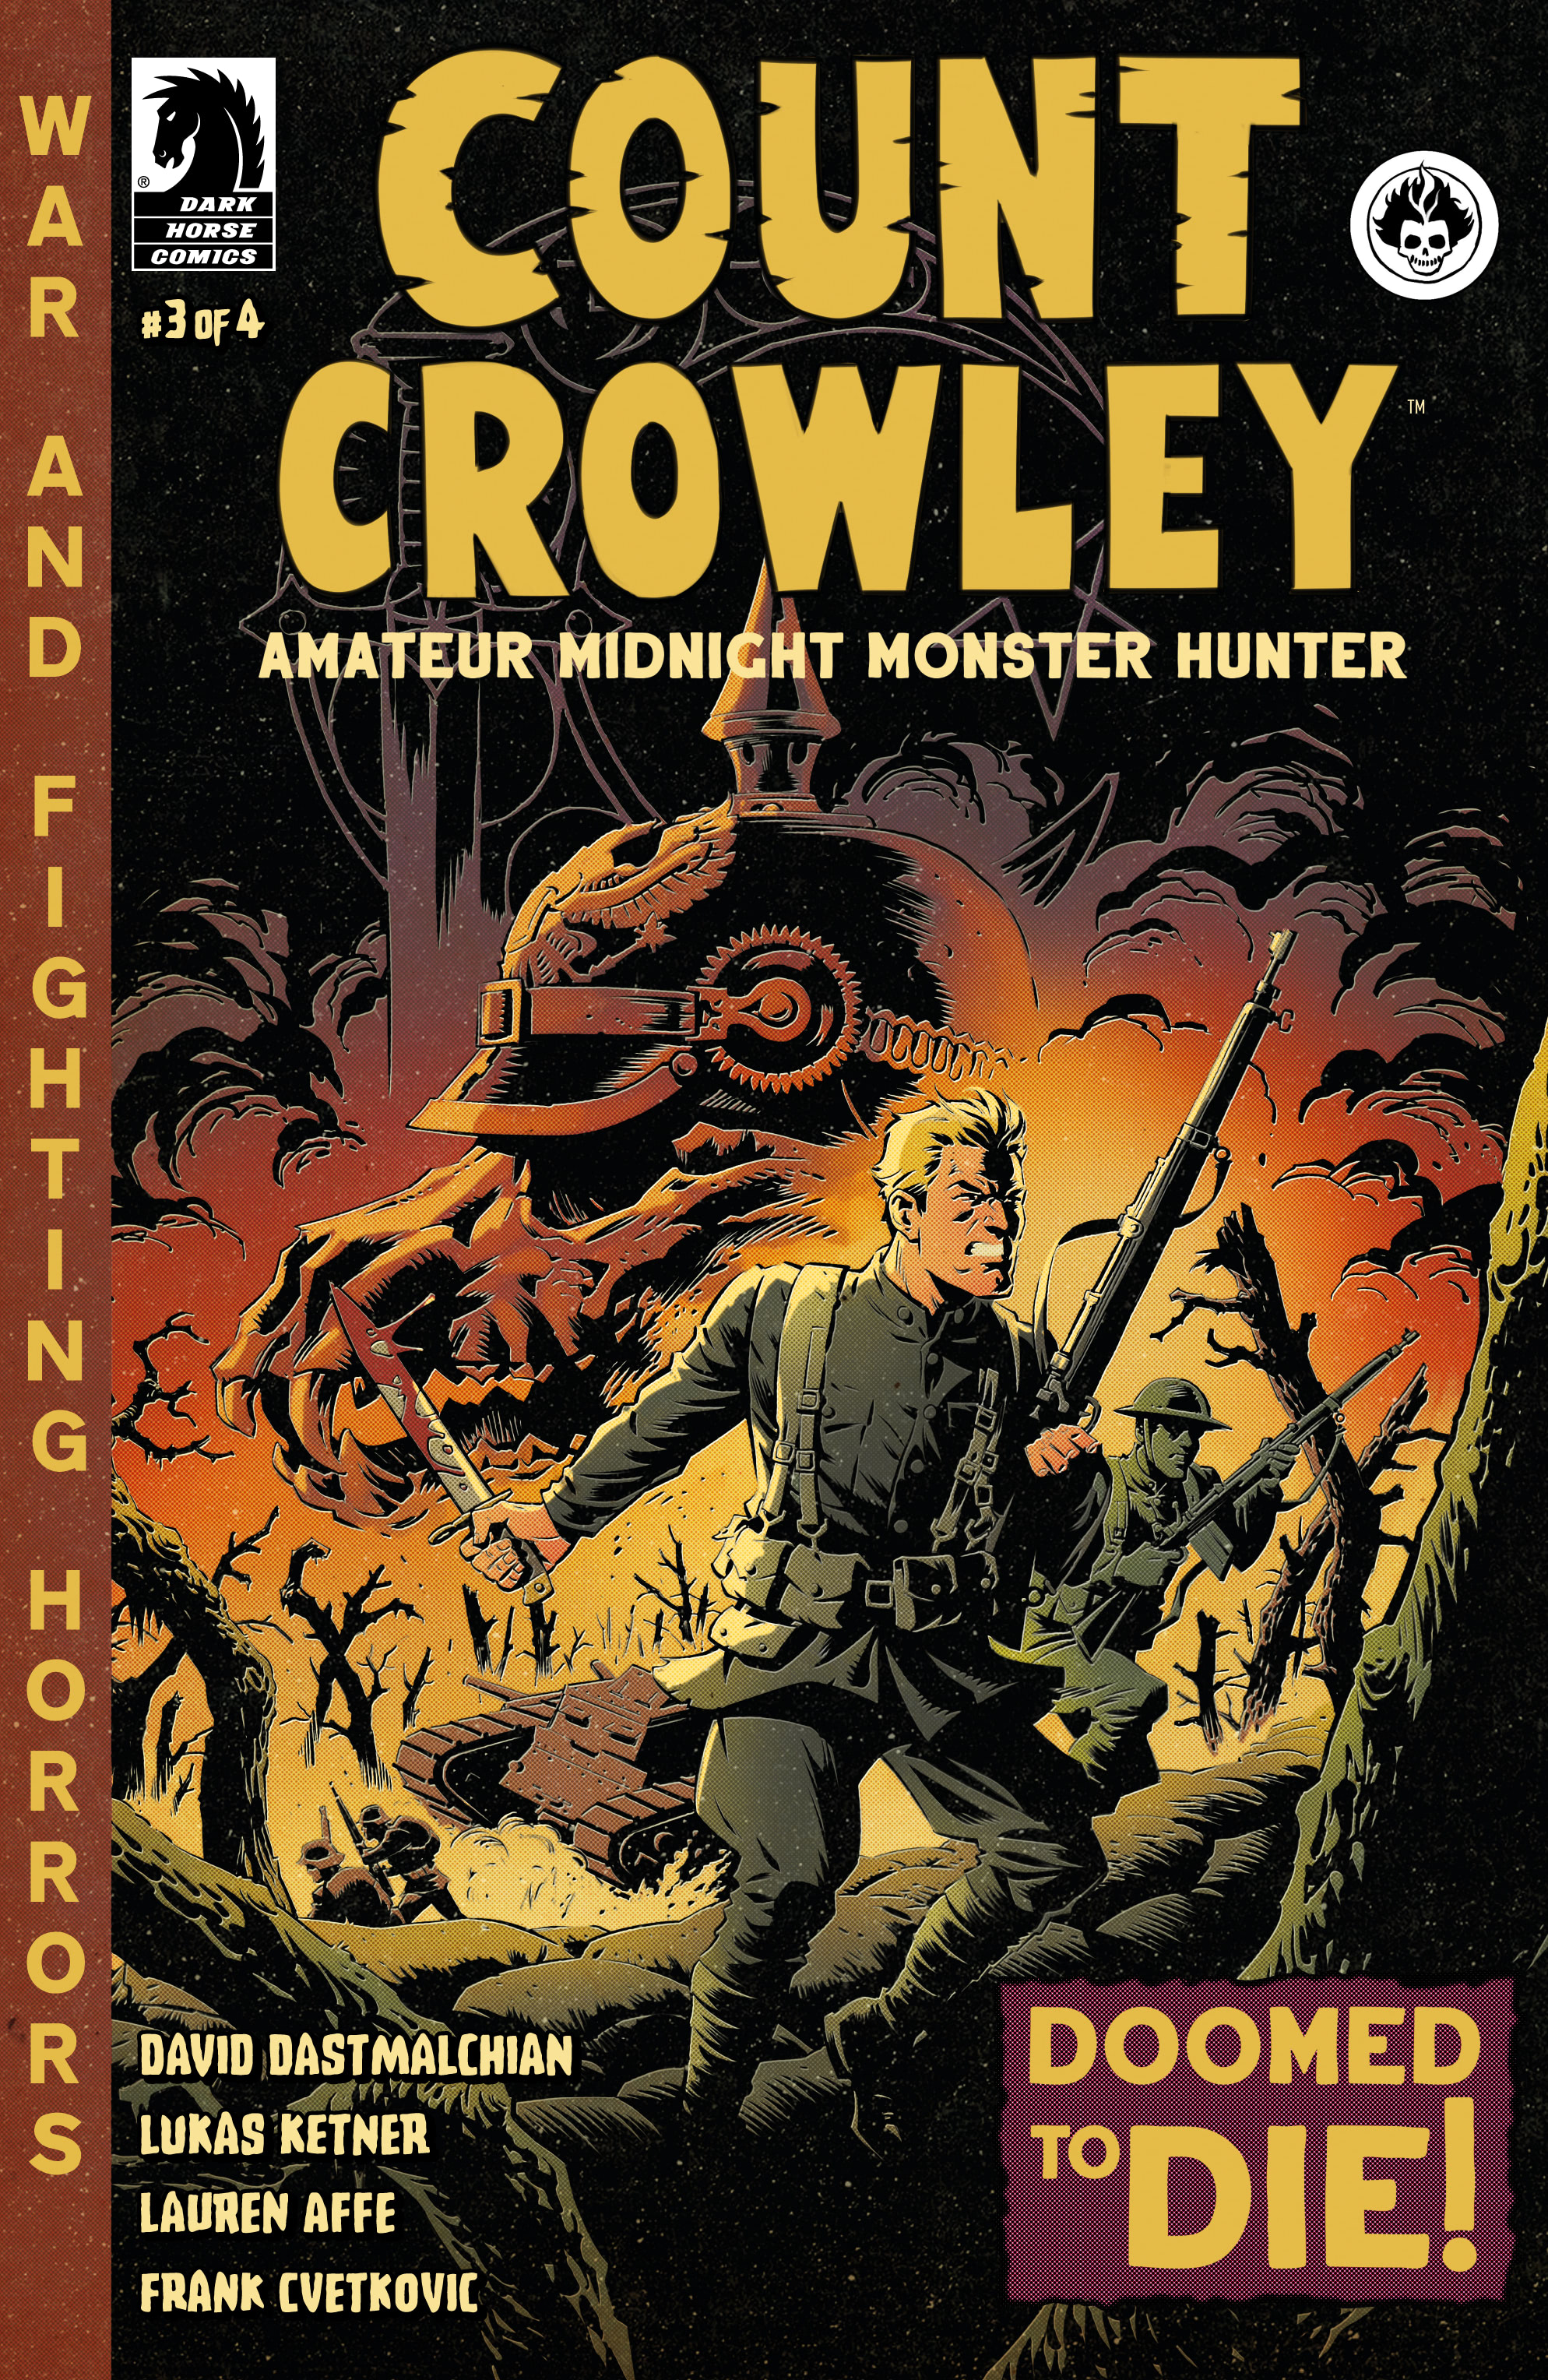 Read online Count Crowley: Amateur Midnight Monster Hunter comic -  Issue #3 - 1